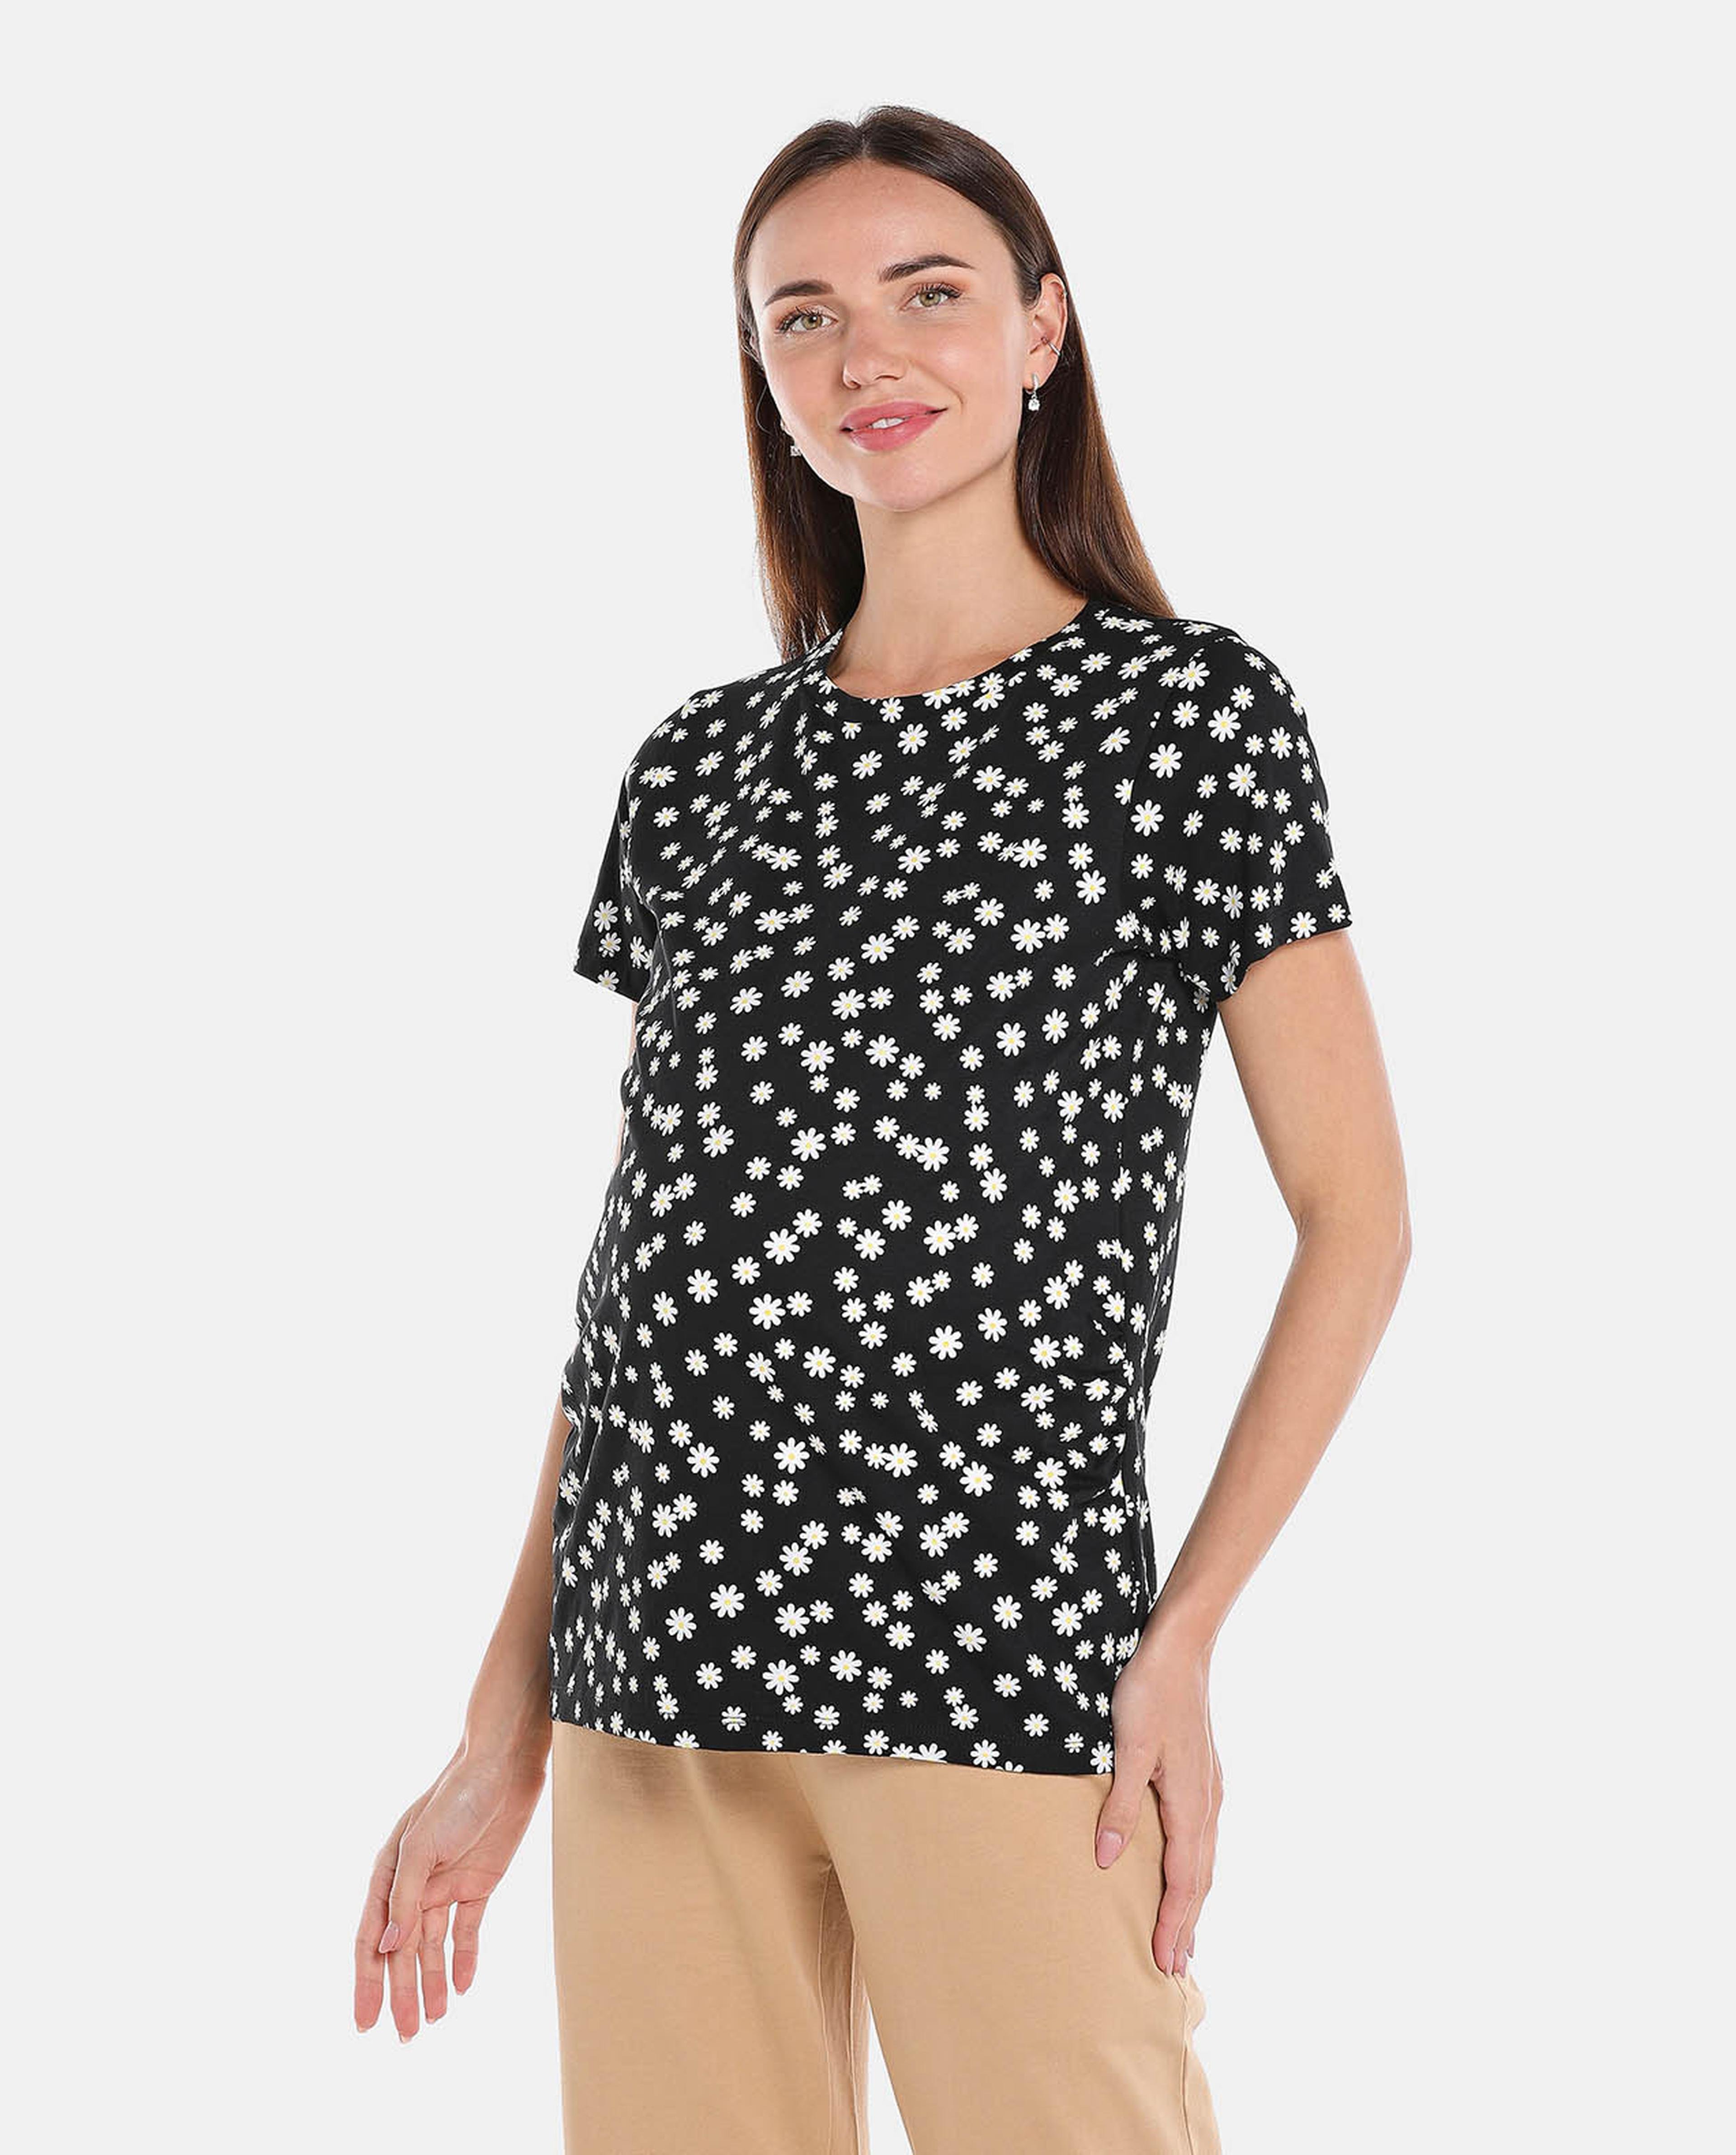 Black Solid Maternity Top